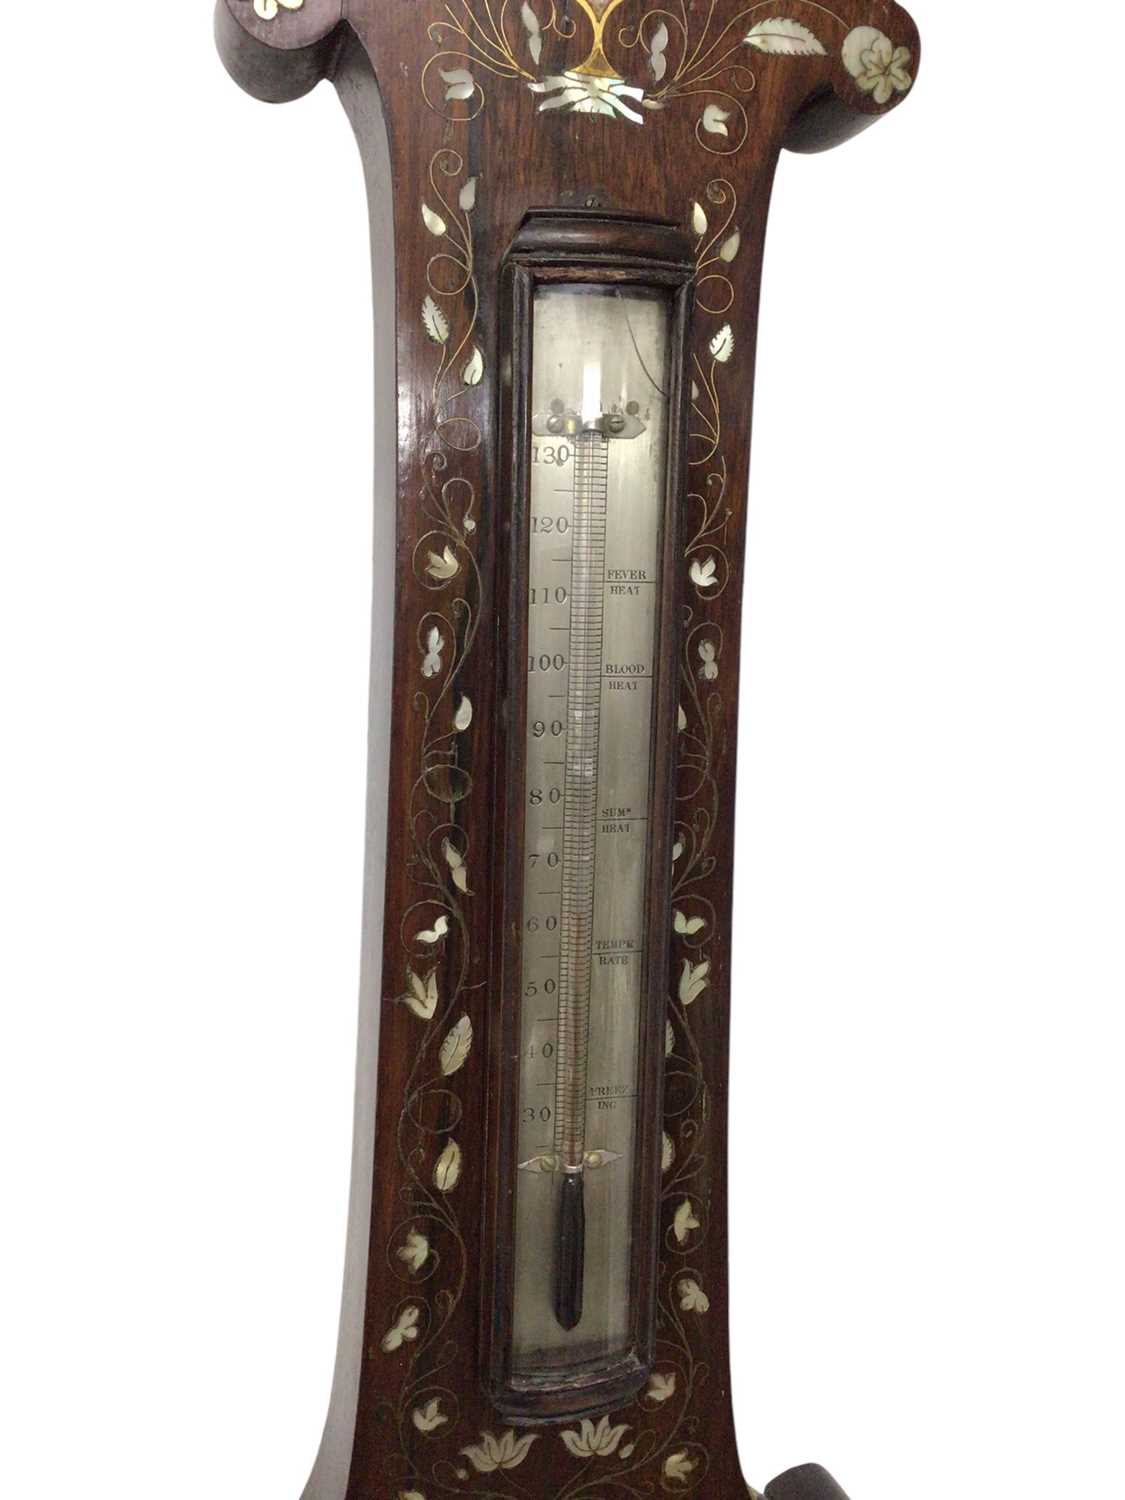 Early Victorian rosewood and mother of pearl inlaid barometer, signed S. Salkind, Ipswich - Image 4 of 7